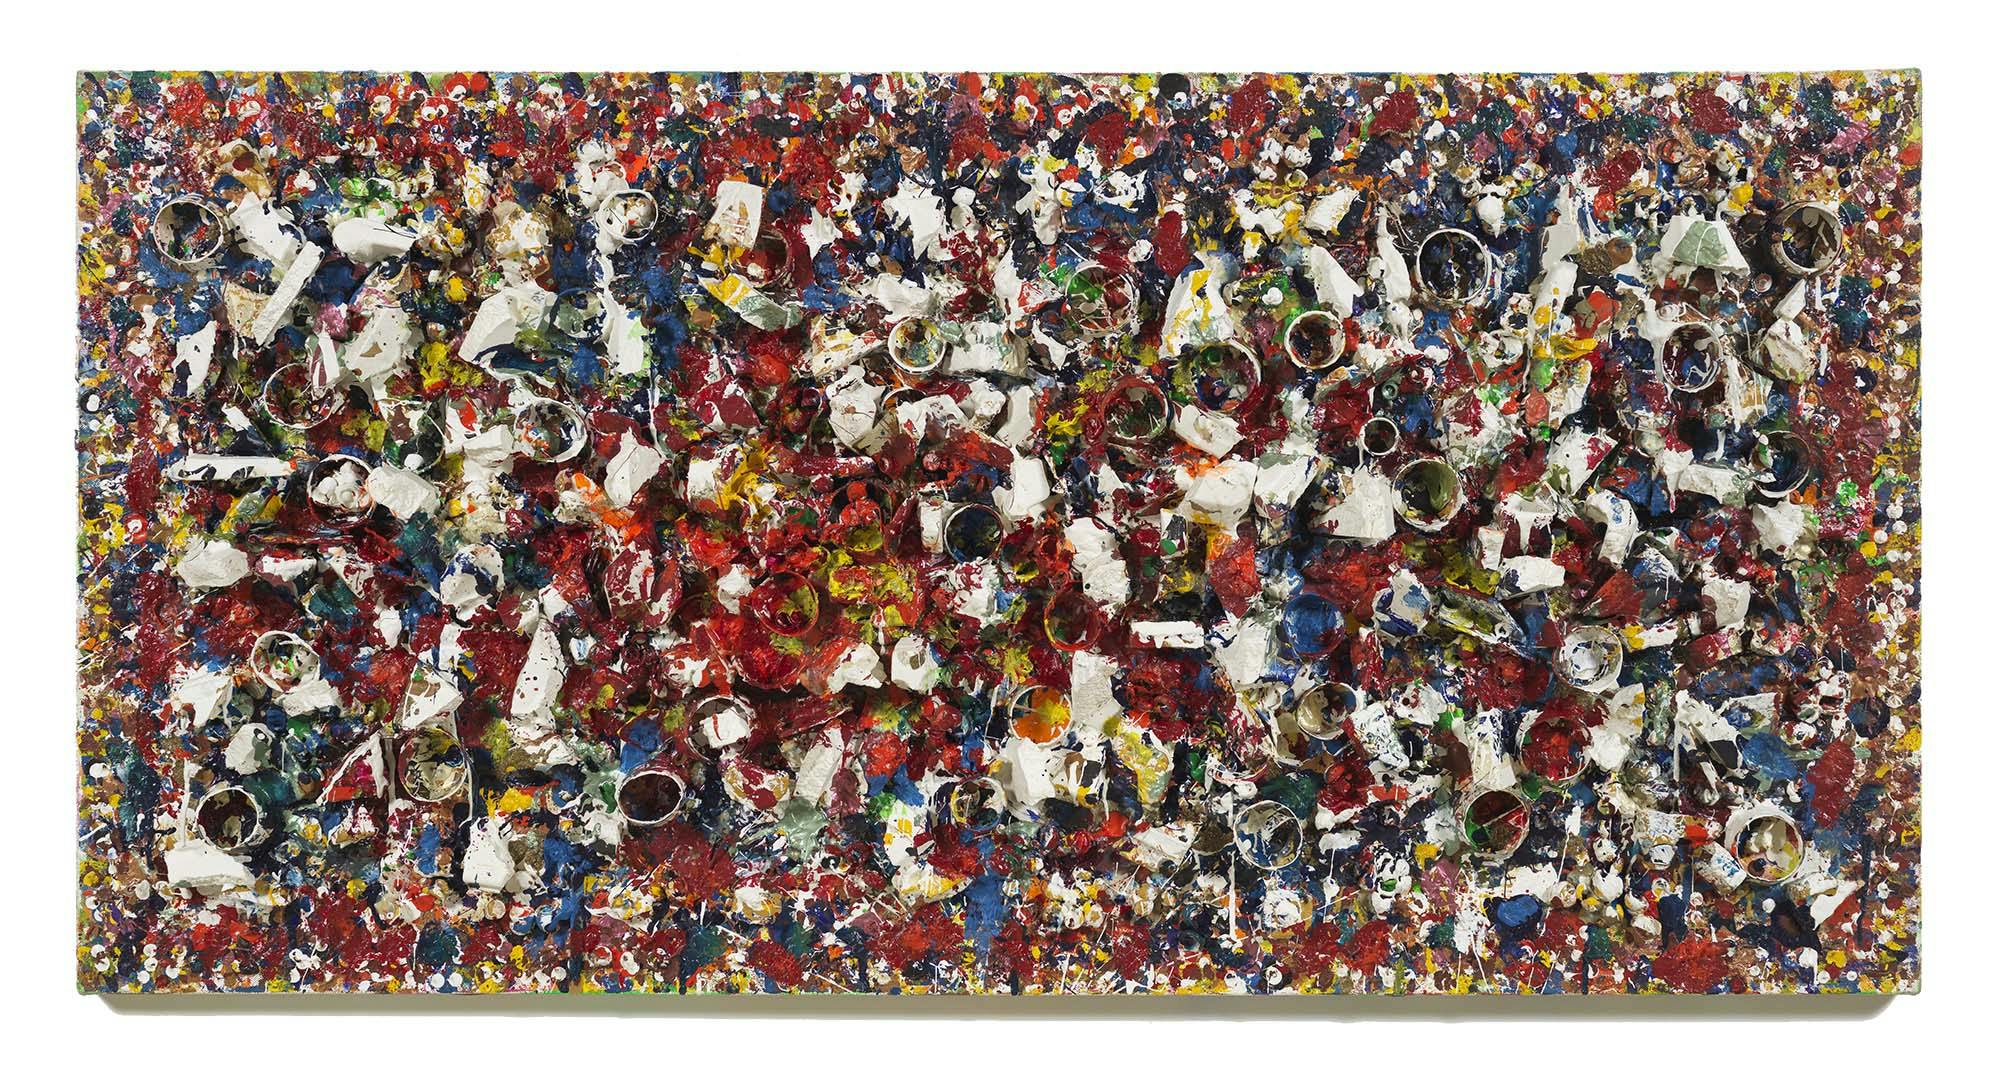 _[Down Avenue B, Red](https://pousette-dartfoundation.org/works/down-avenue-b-red/),_ 1983–85, acrylic and mixed media on linen, 40 x 80 in.  (101.6 x 203.2 cm)
 – The Richard Pousette-Dart Foundation